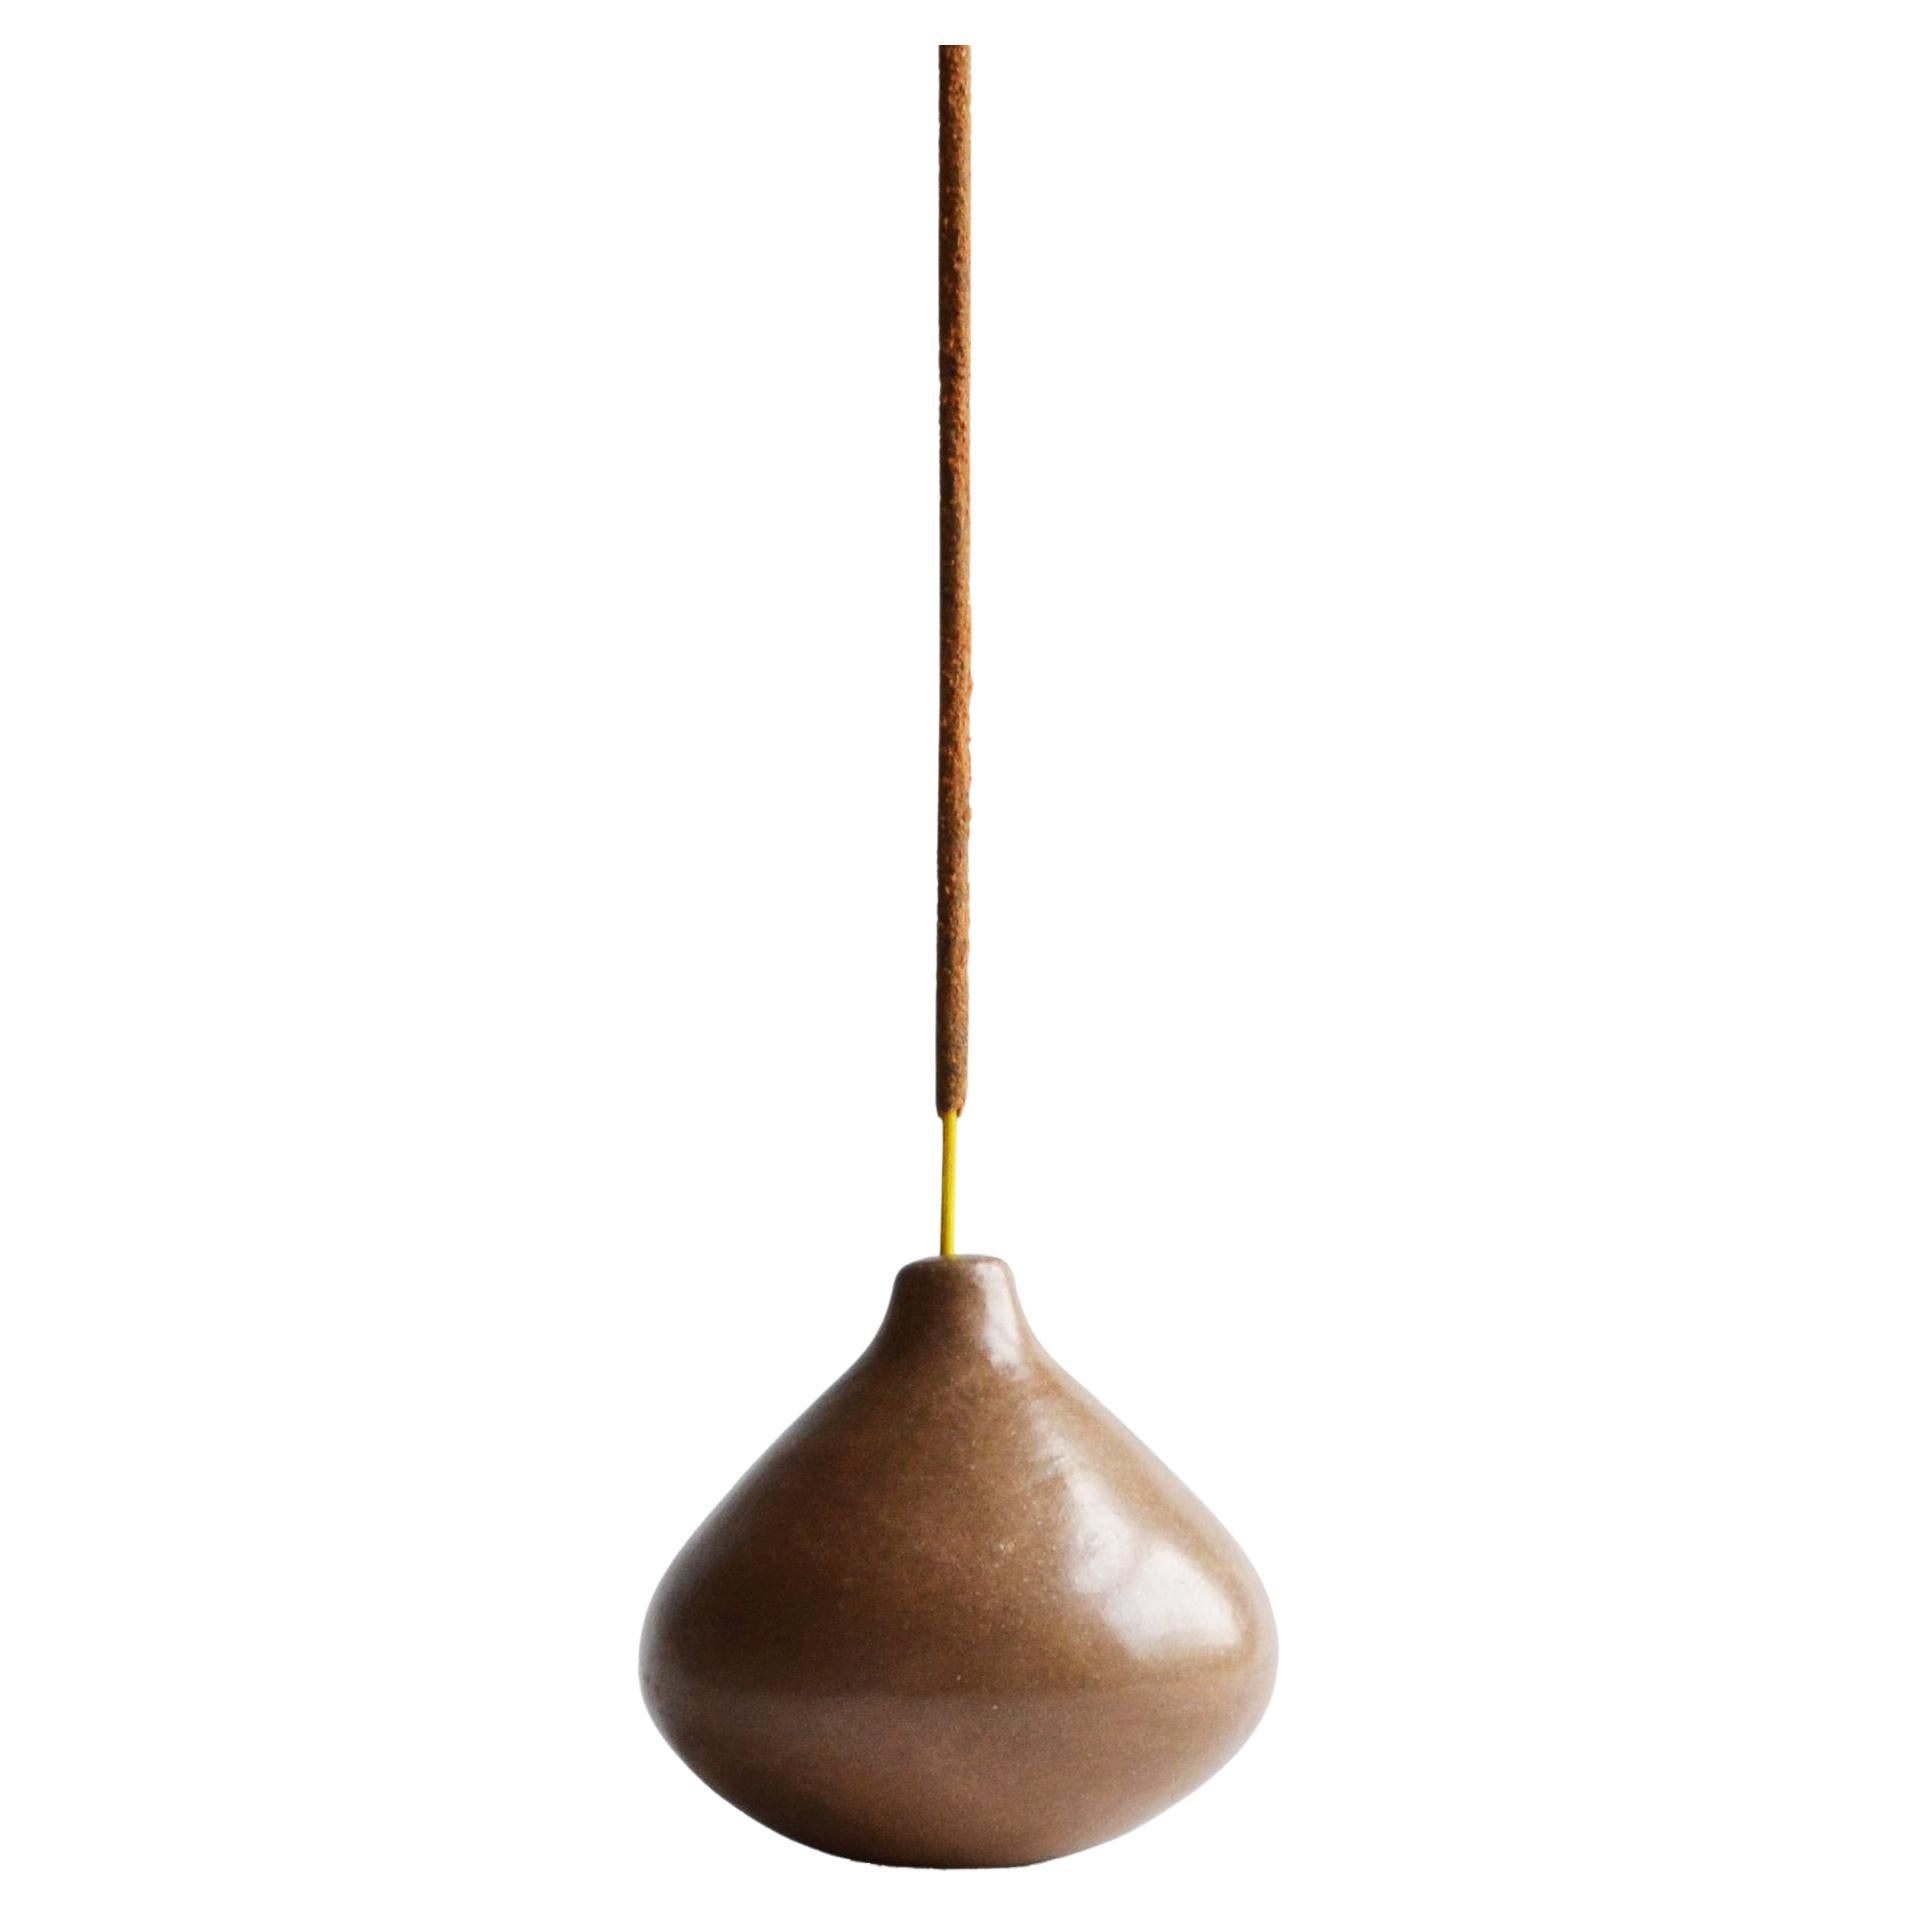 Incense Holder Natural Beeswax Finish Handmade Burnished Clay from Oaxaca Pera